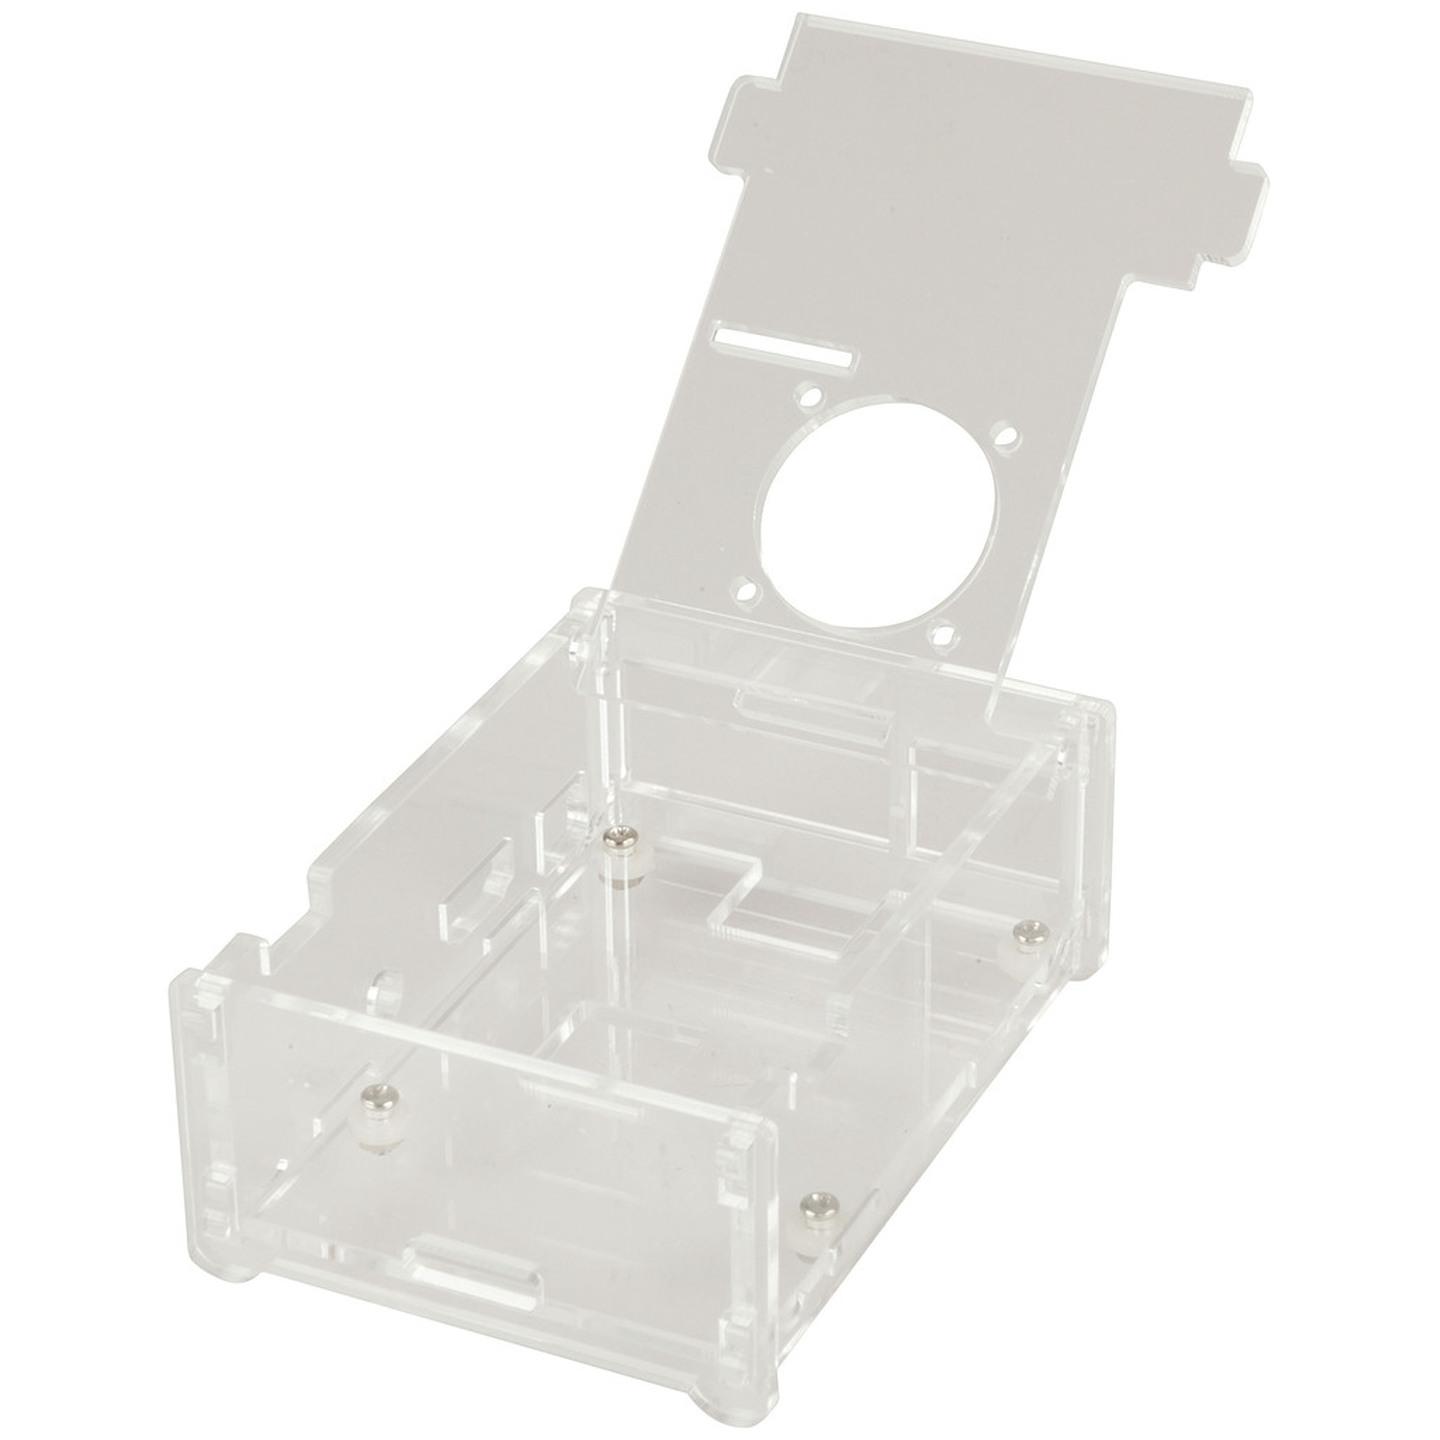 Clear Acrylic Enclosure for Raspberry Pi with GPIO access